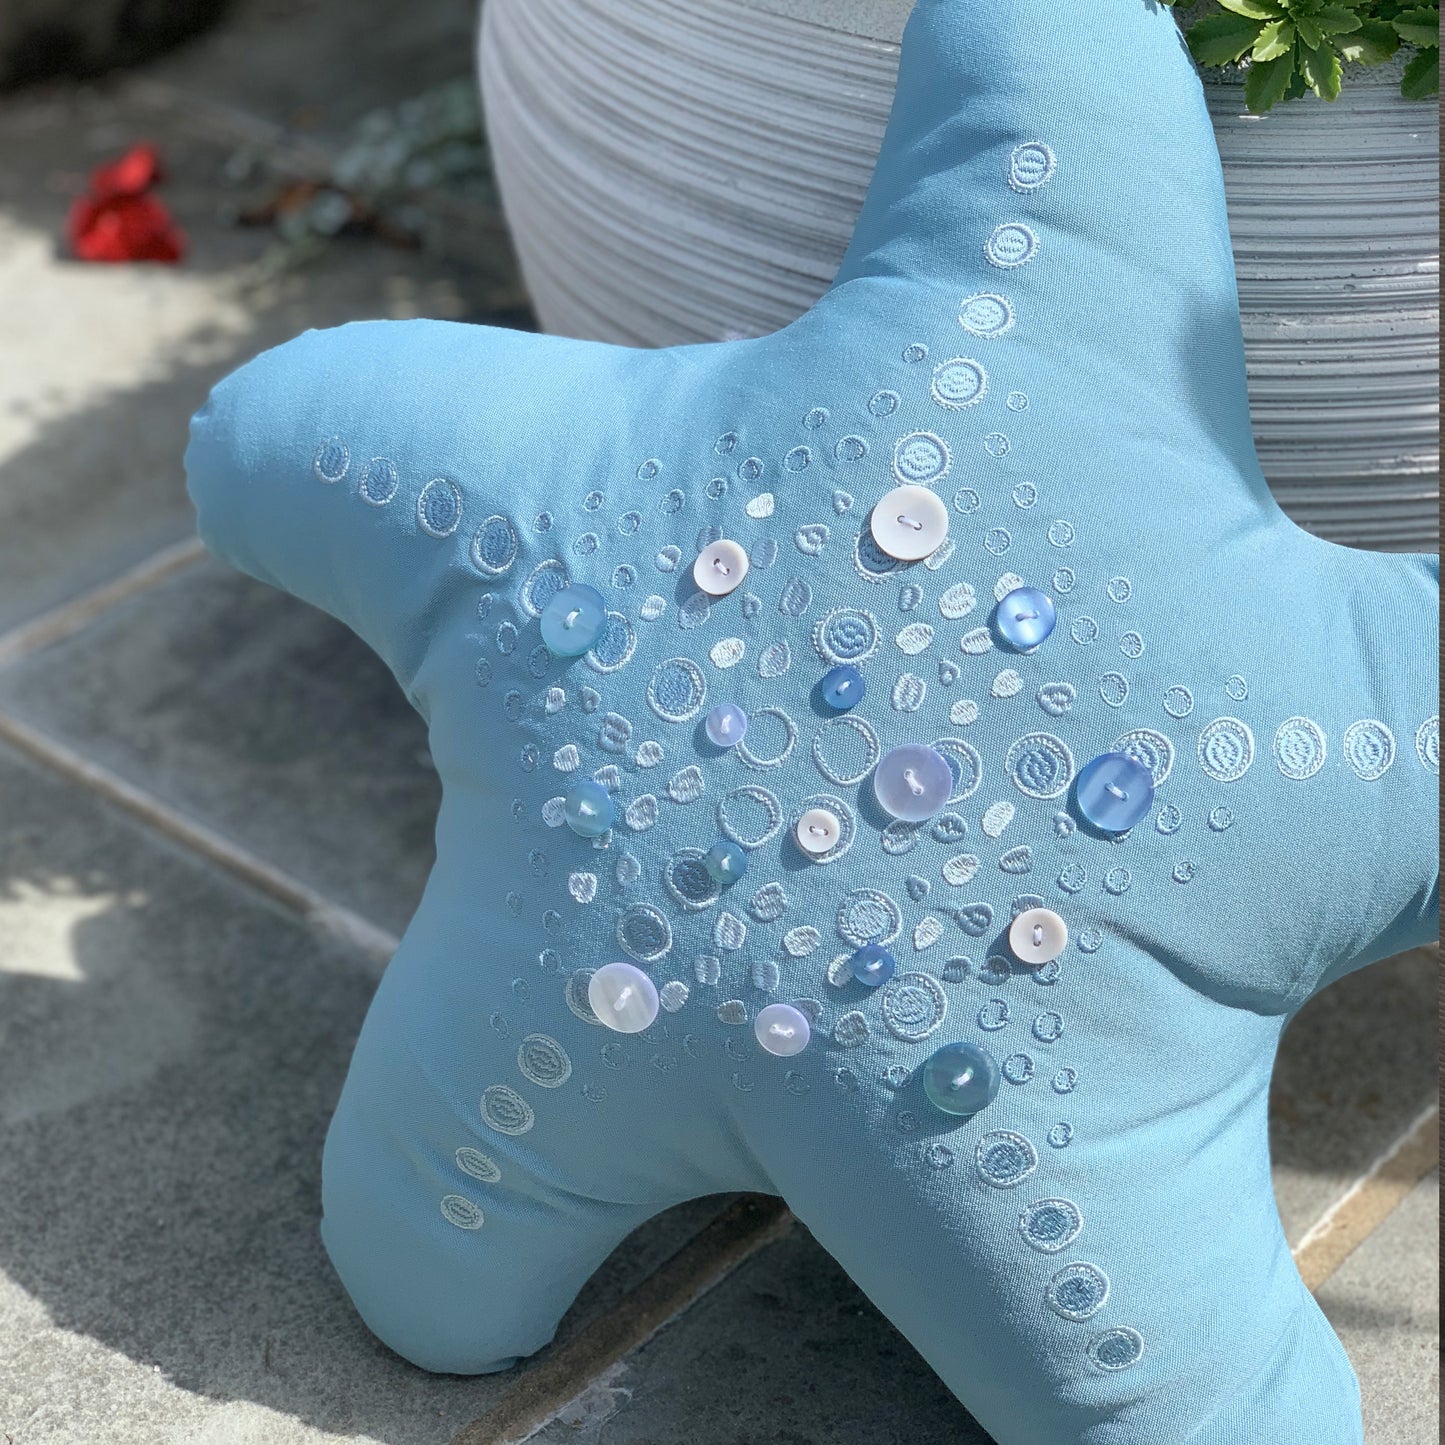 Oceana Shaped Star Fish pillow styled on an outdoor patio.